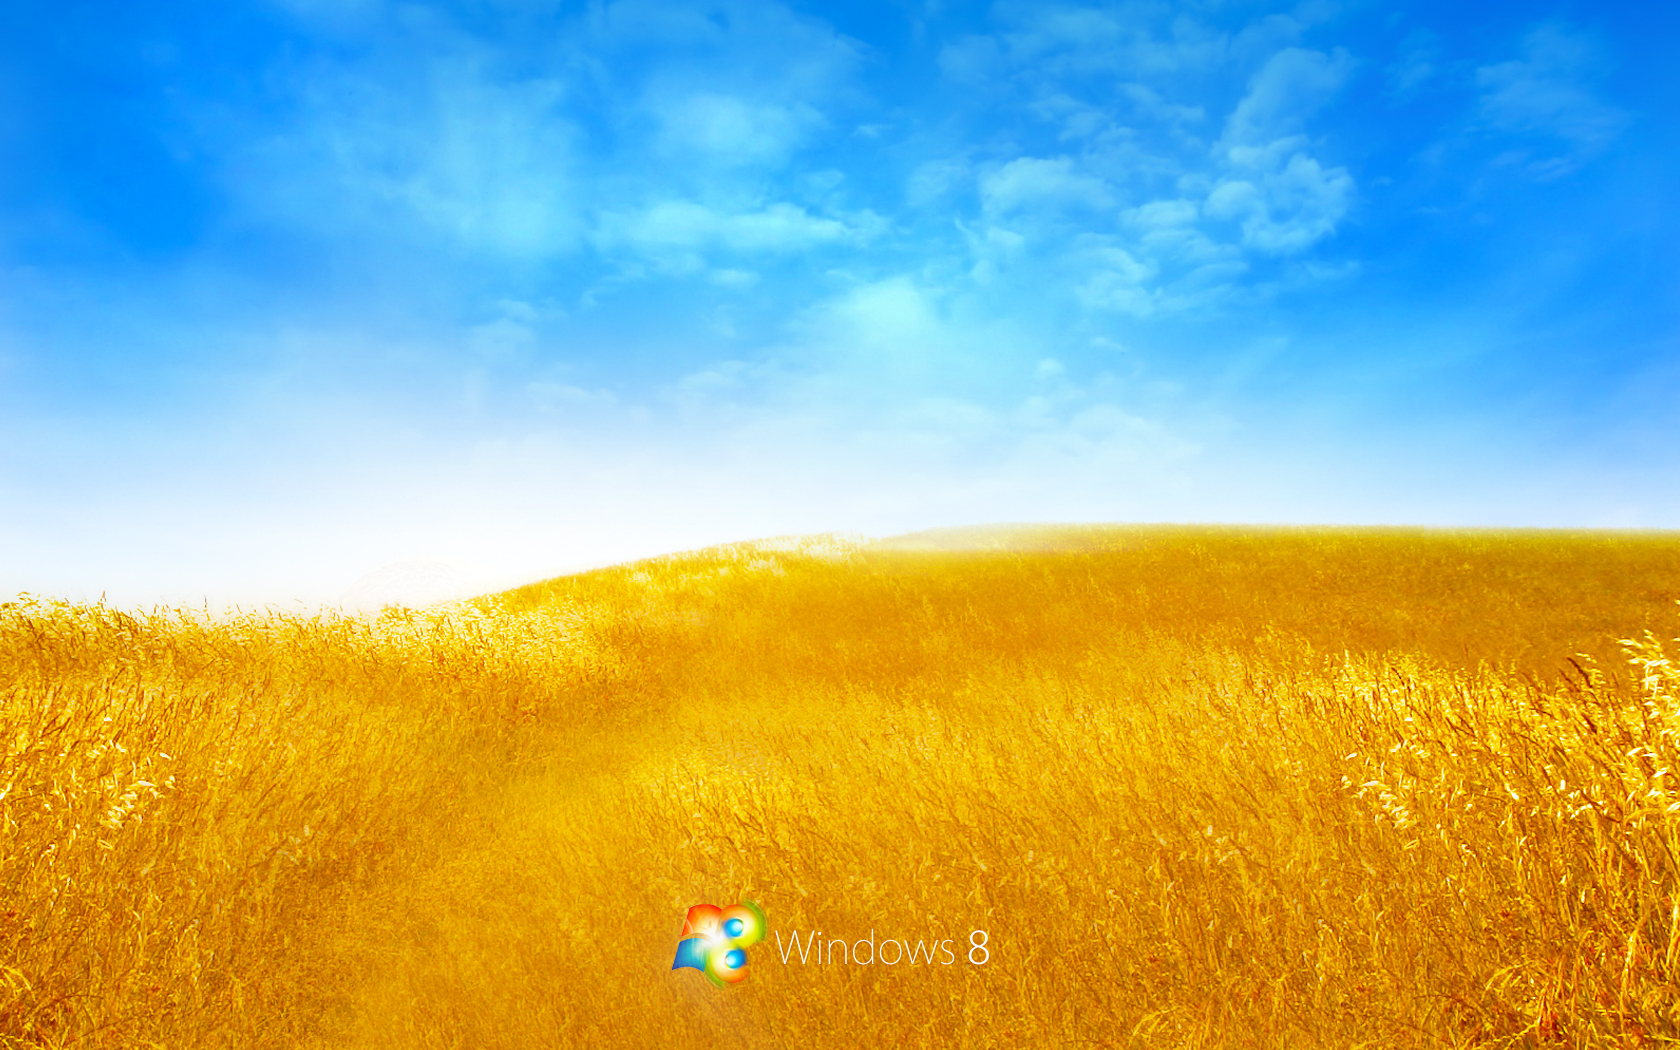 These HD Windows Wallpaper Image